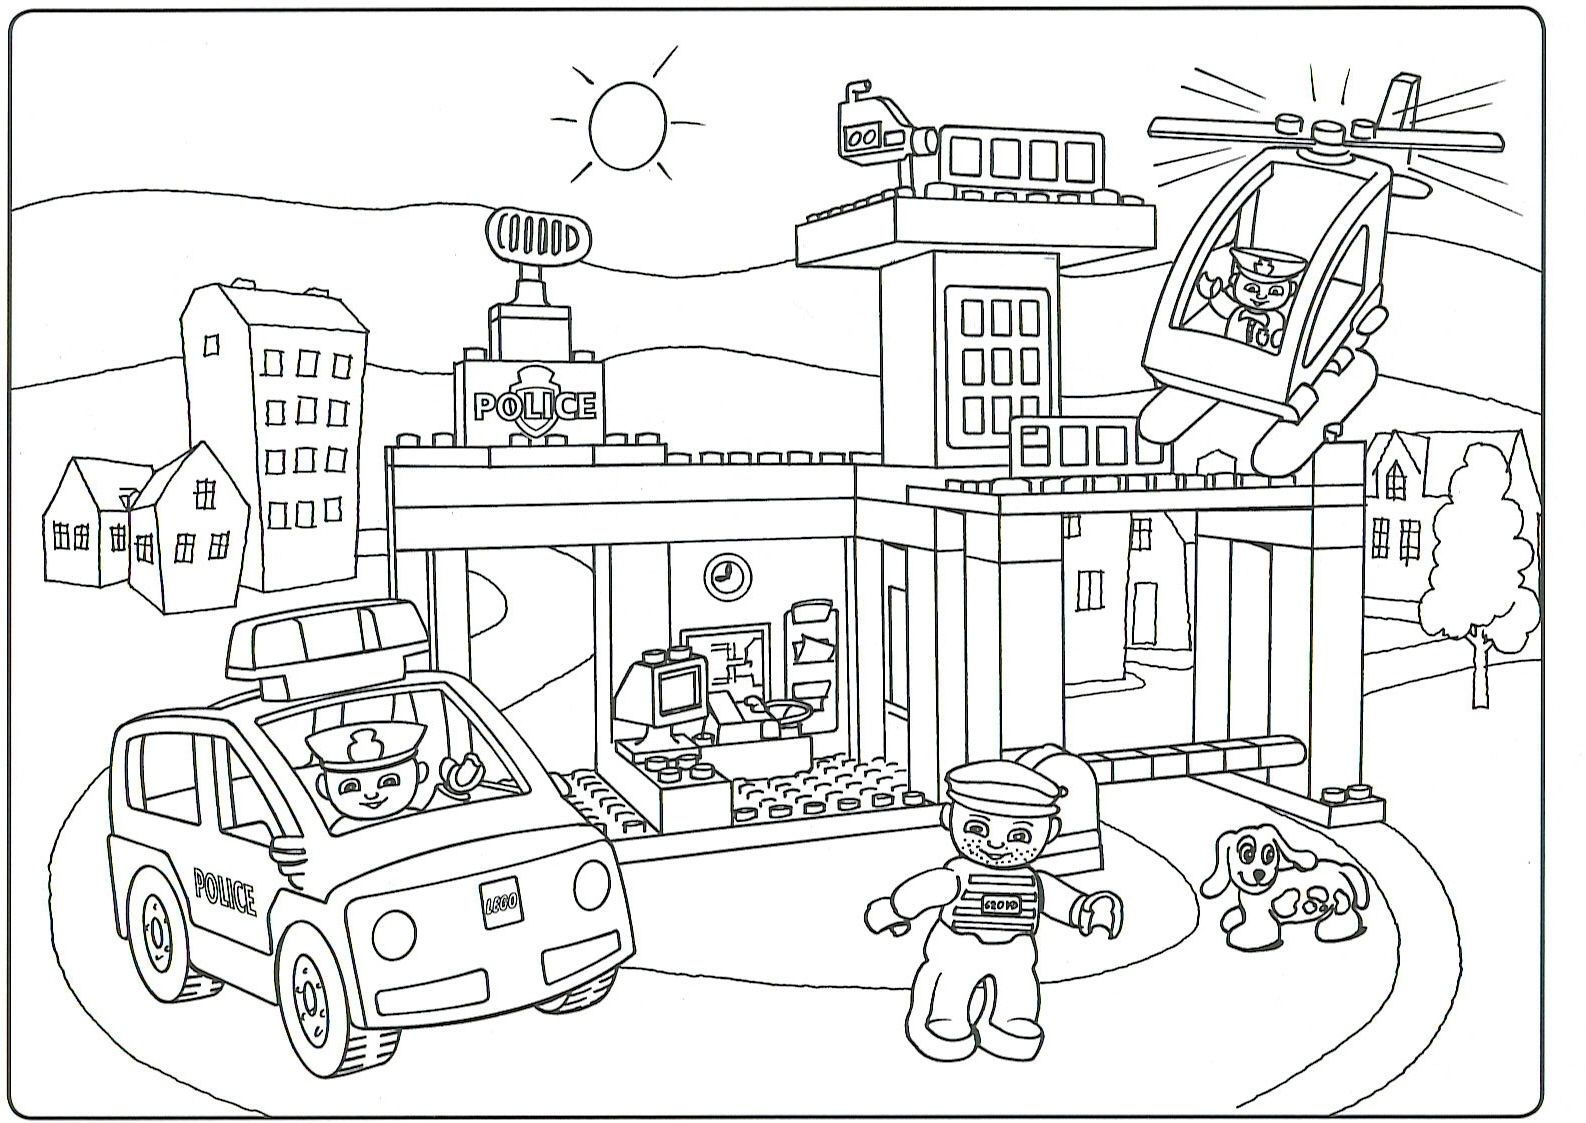 Police Station Coloring Pages Gallery | Lego coloring pages - Coloring  Library